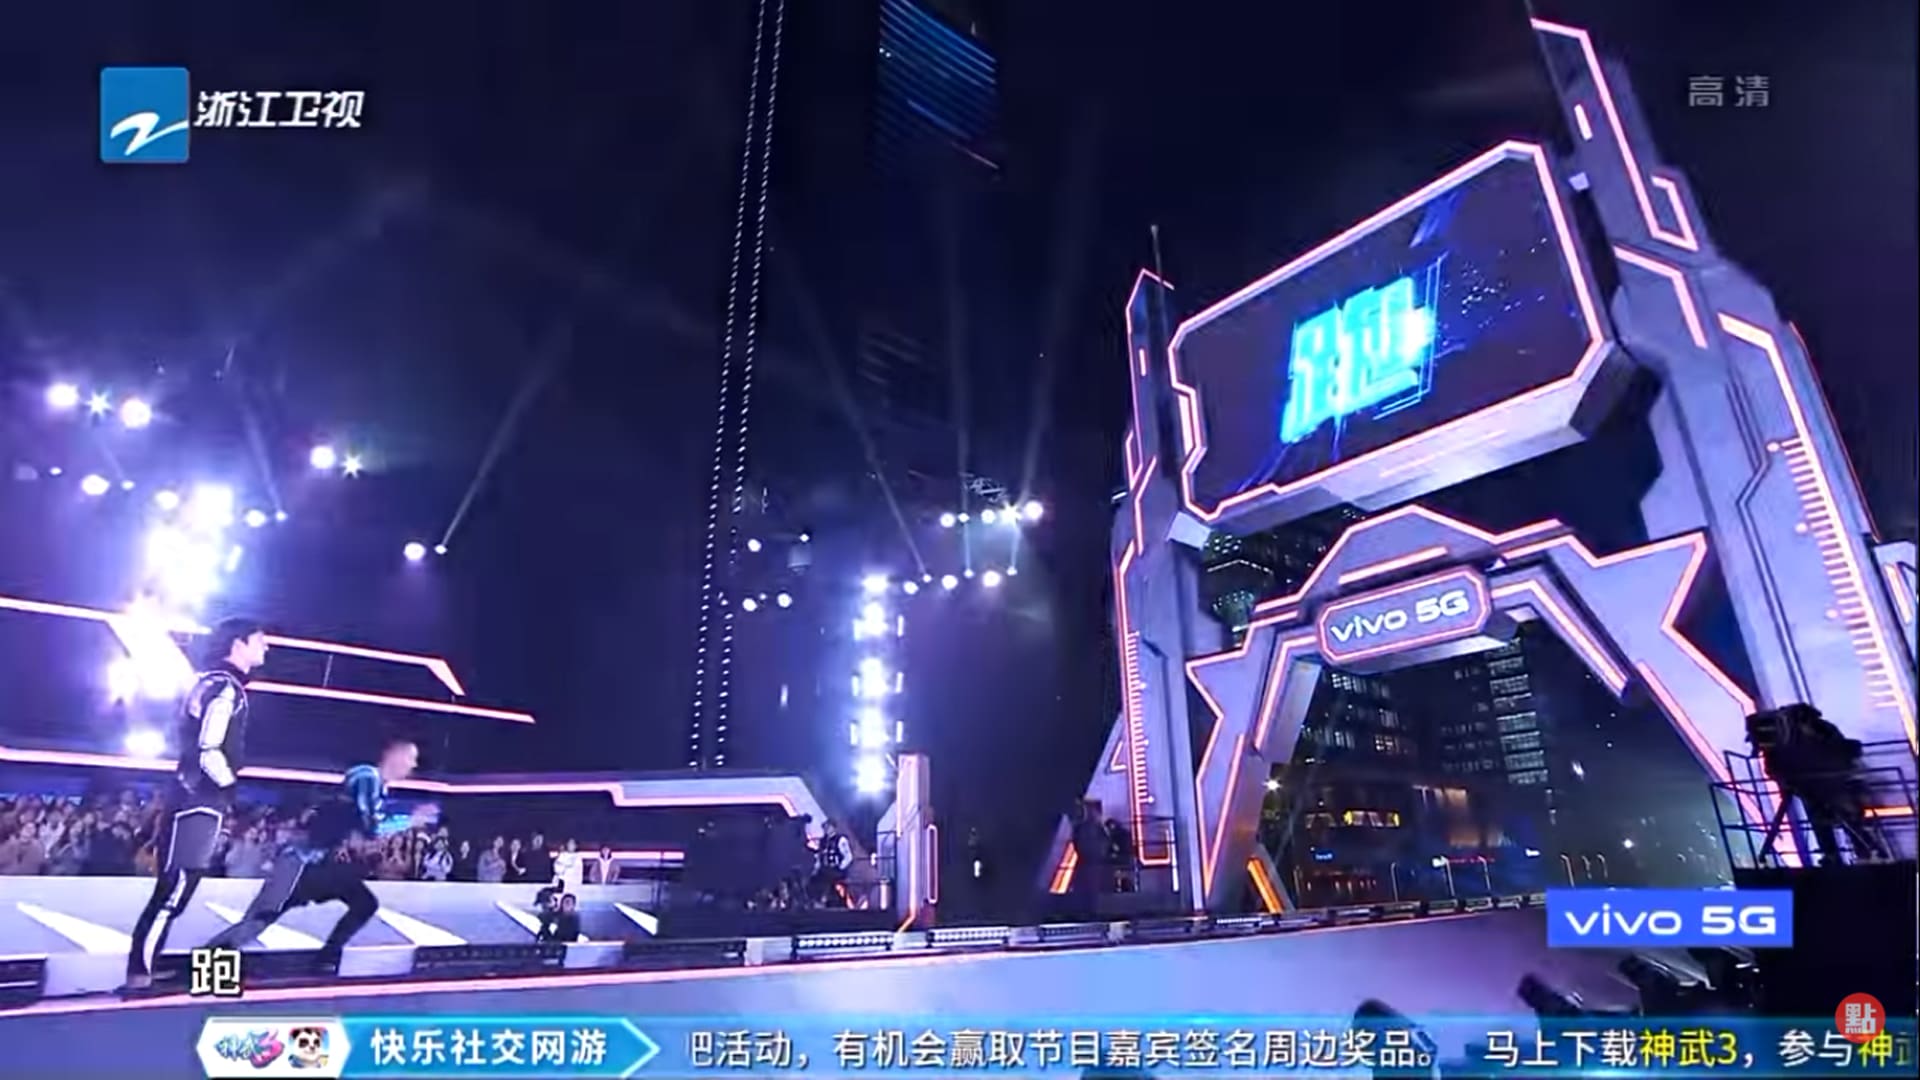 Chase Me, The Game Show Godfrey Gao Was Filming When He Collapsed, Is More Hardcore Than Ninja Warrior